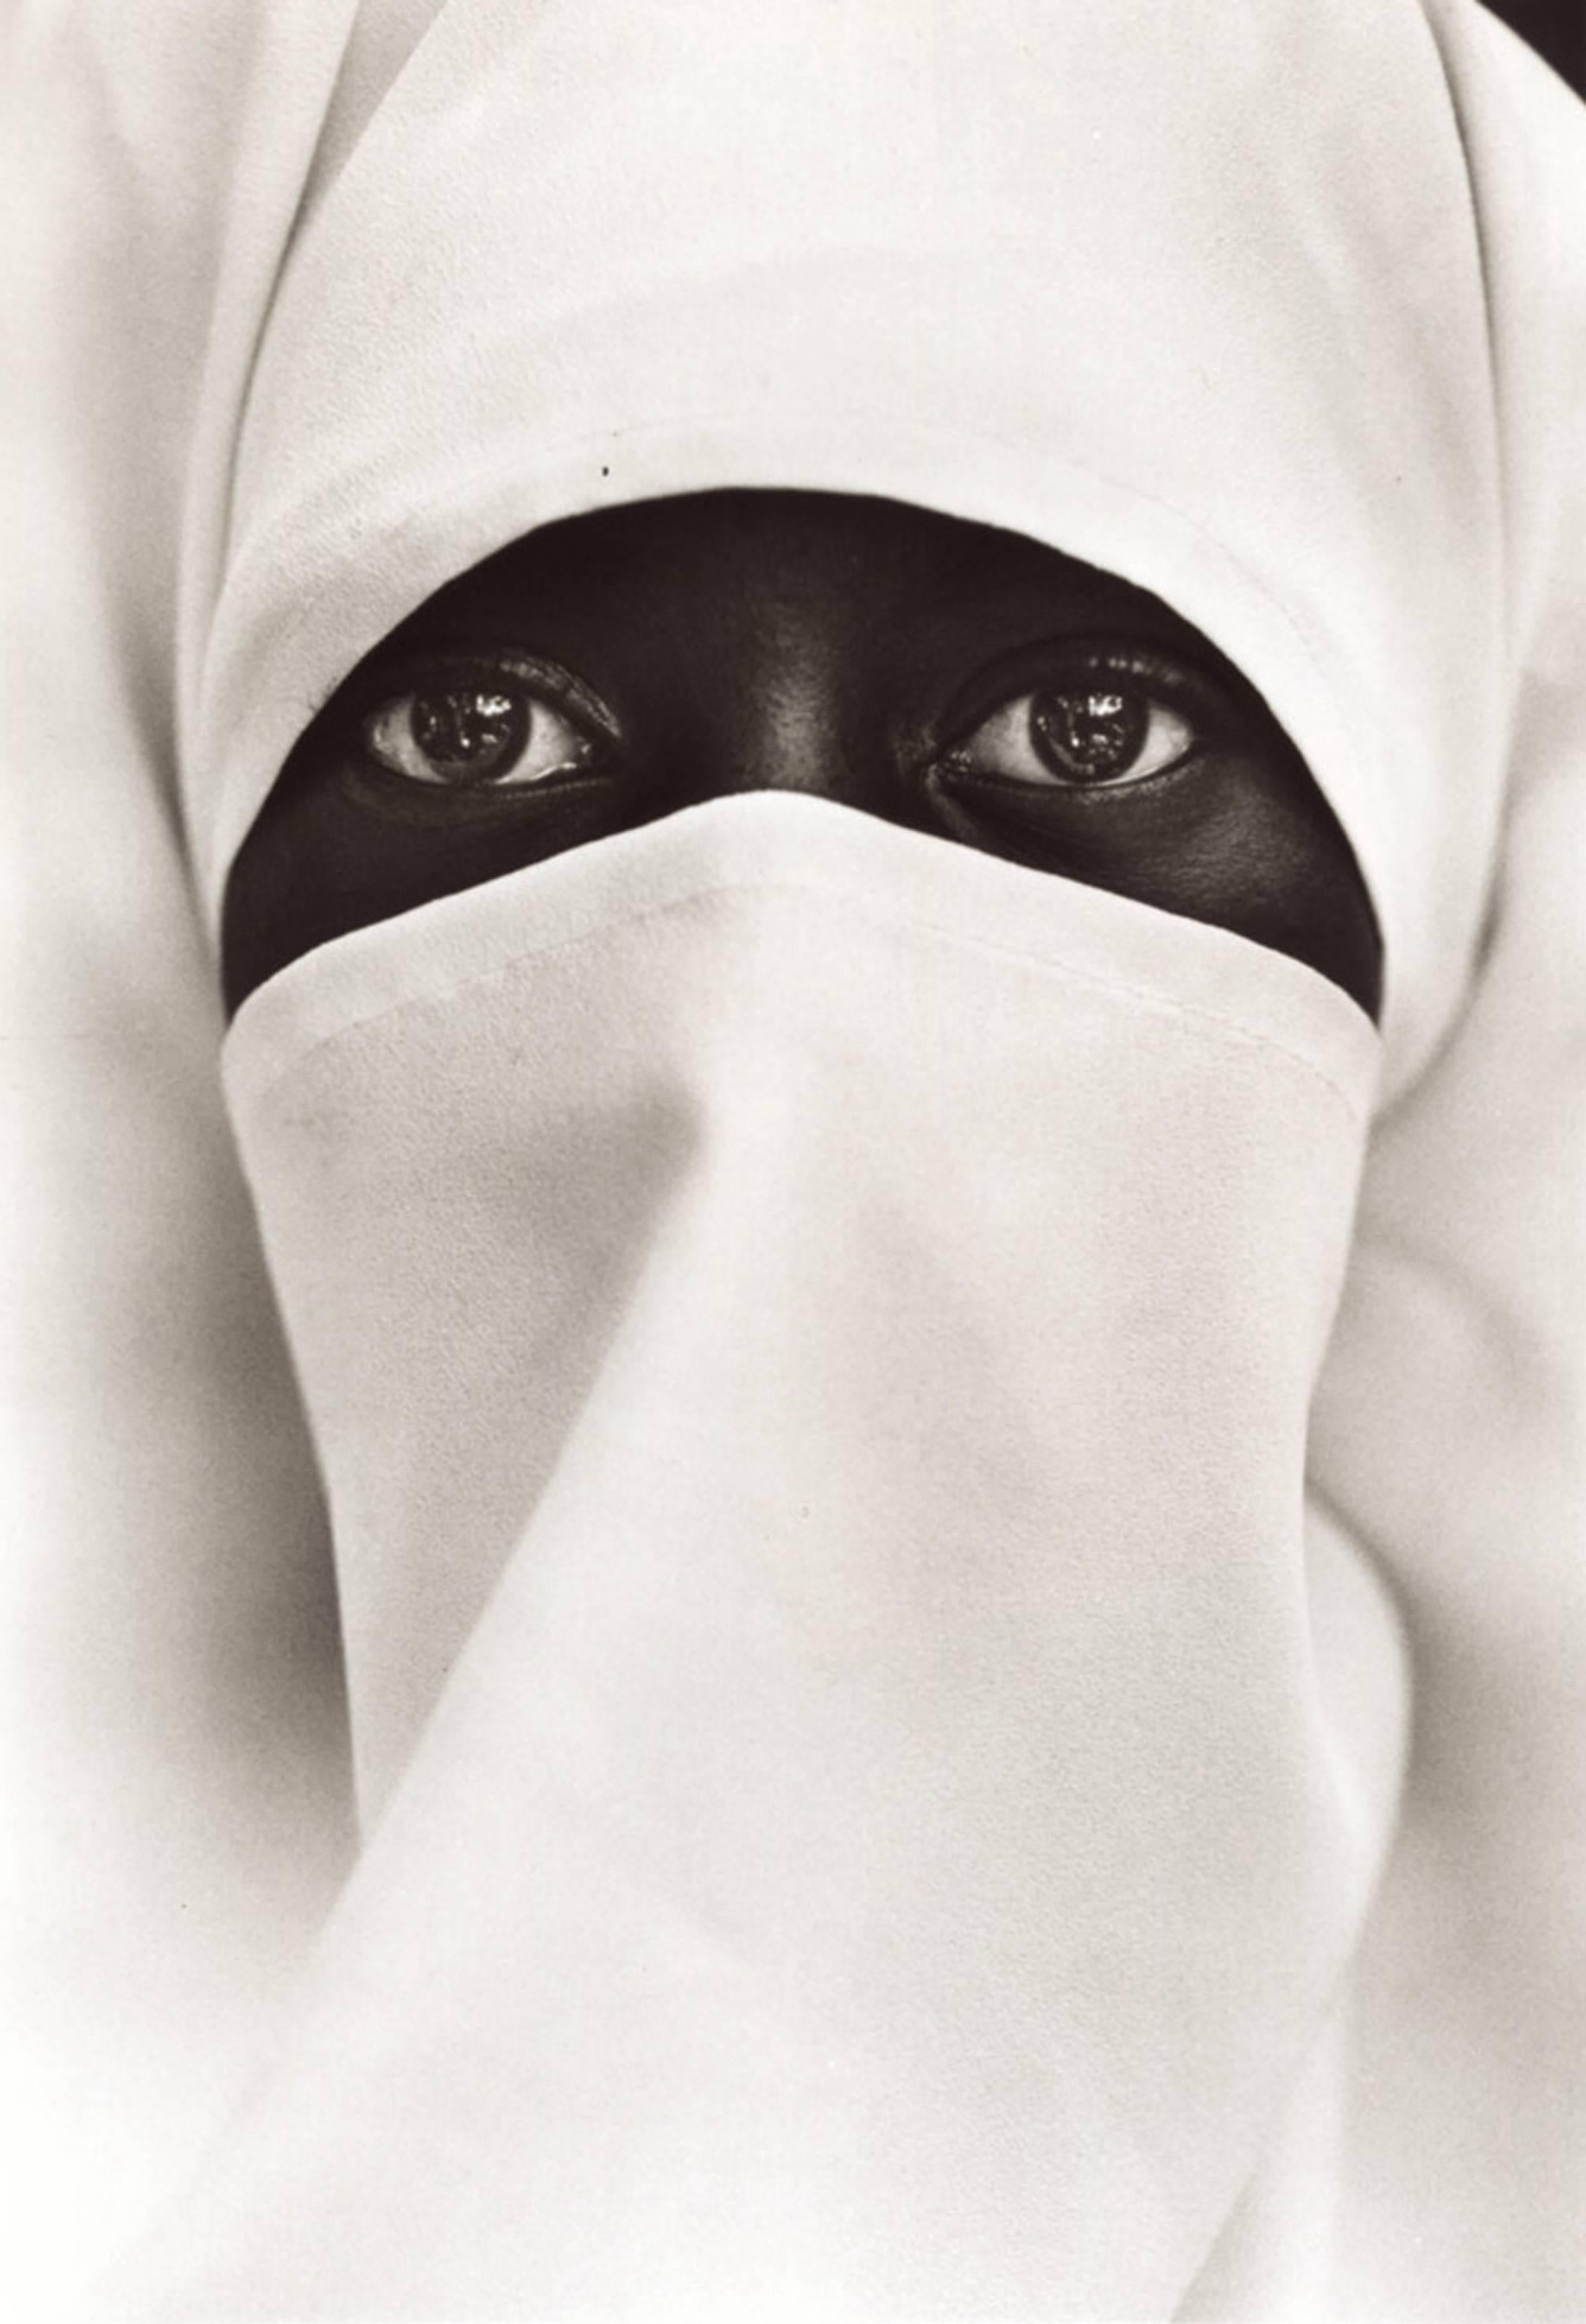 Eyes of Allah, Islam [Muslim Woman] - Photograph by Chester Higgins 